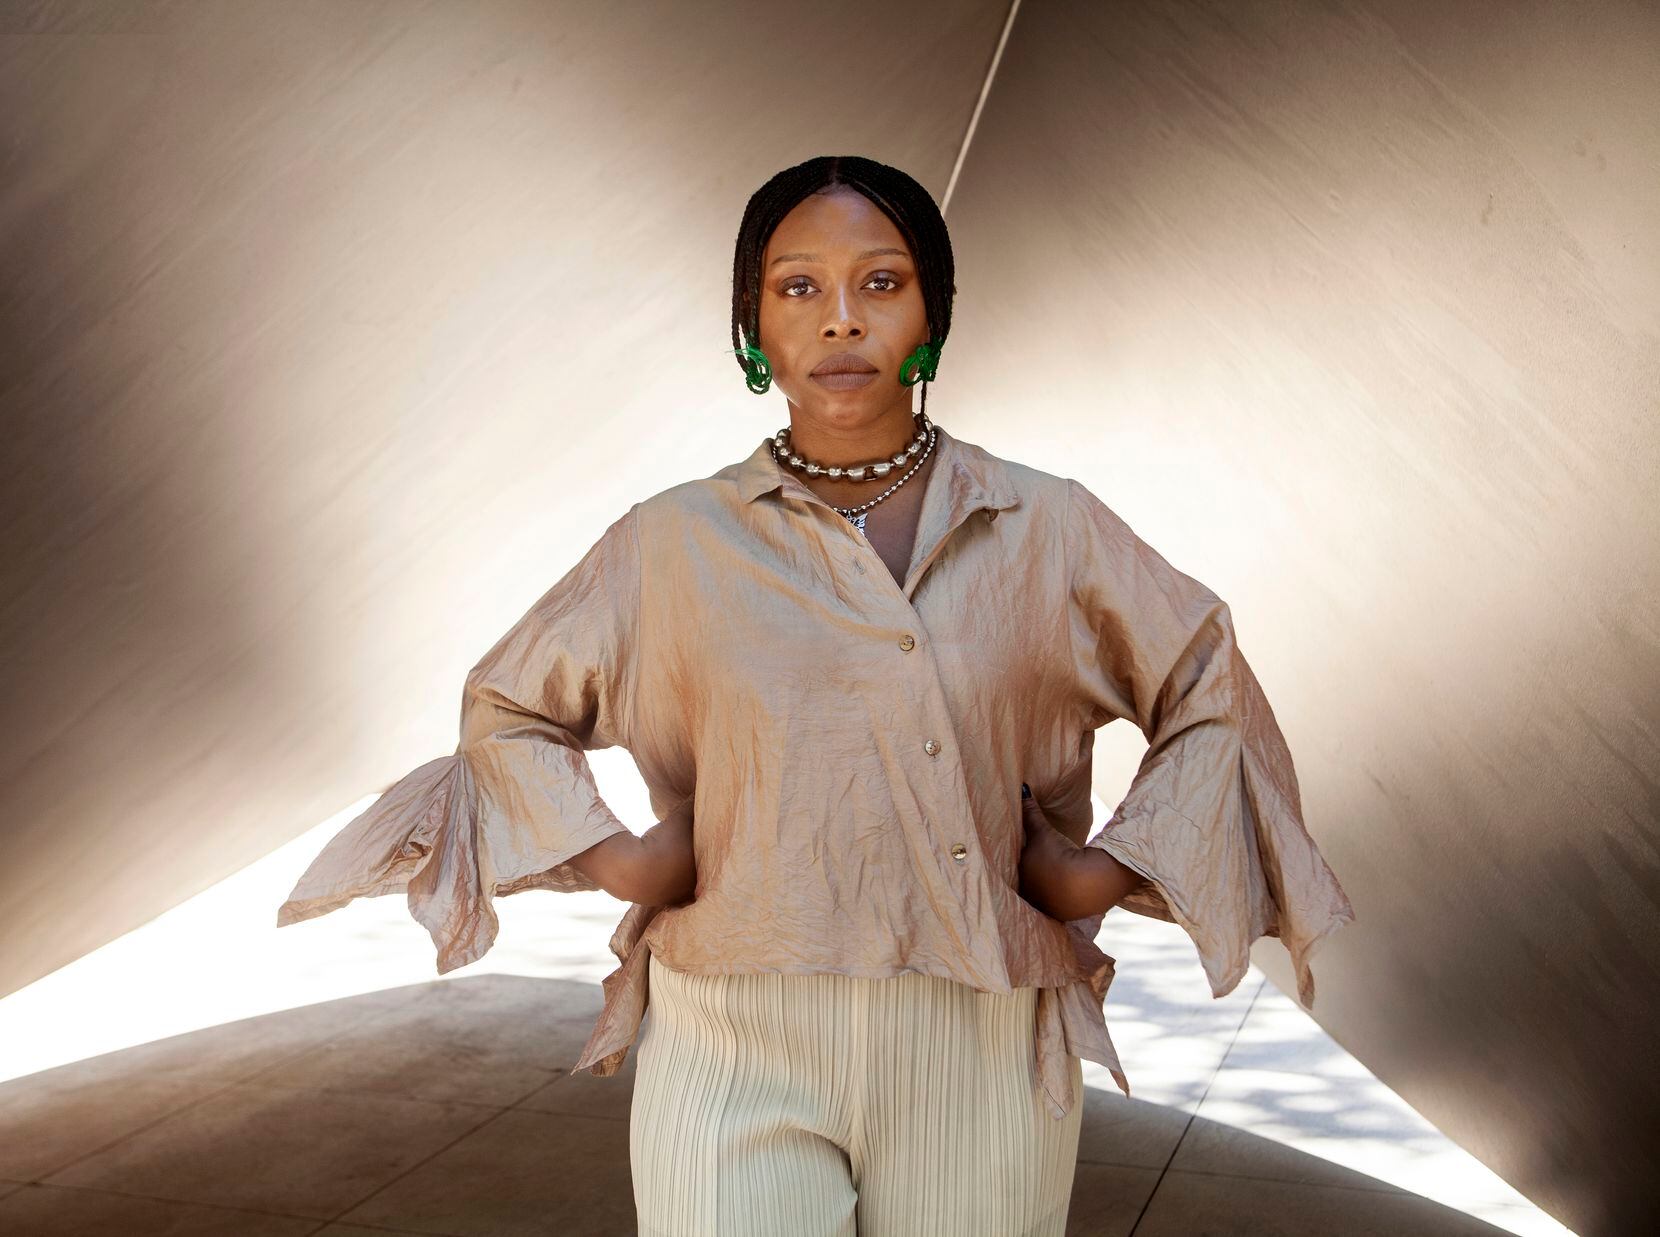 Artist Naudline Pierre, photographed at the Dallas Museum of Art for her exhibition "What...